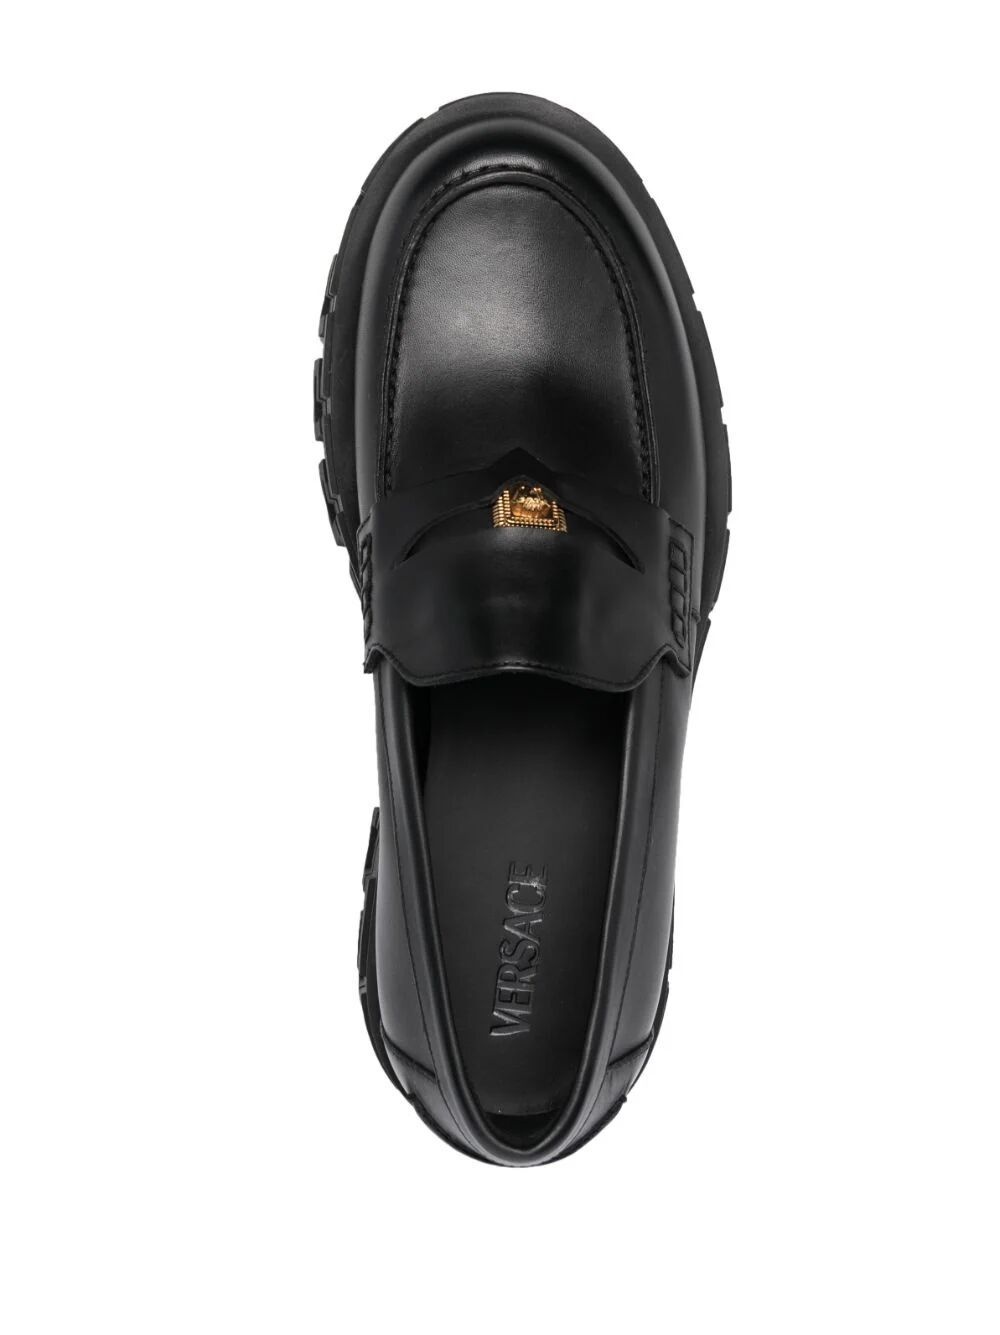 LOAFER CALF LEATHER - 4